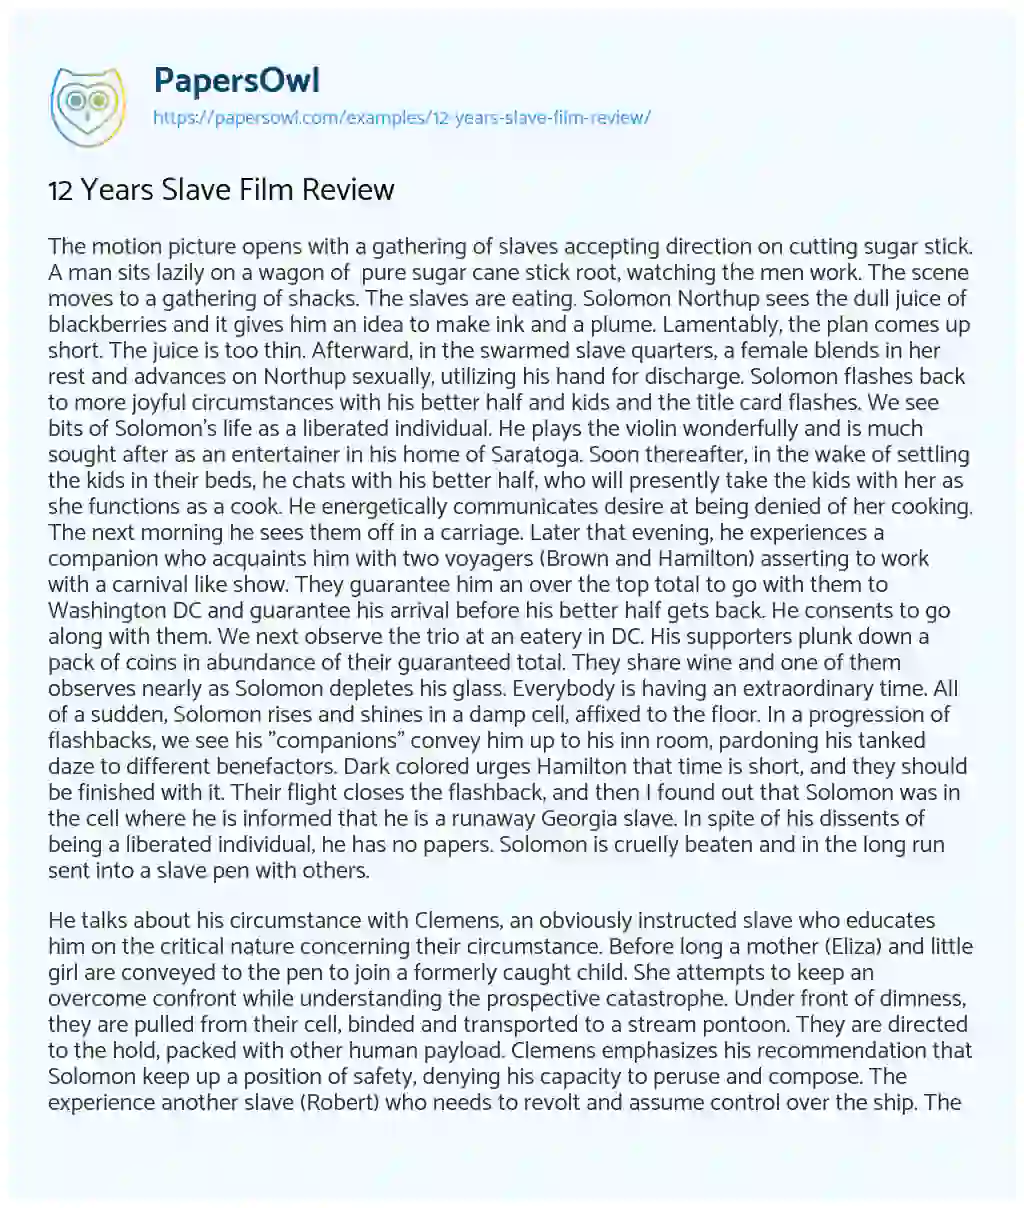 Essay on 12 Years Slave Film Review